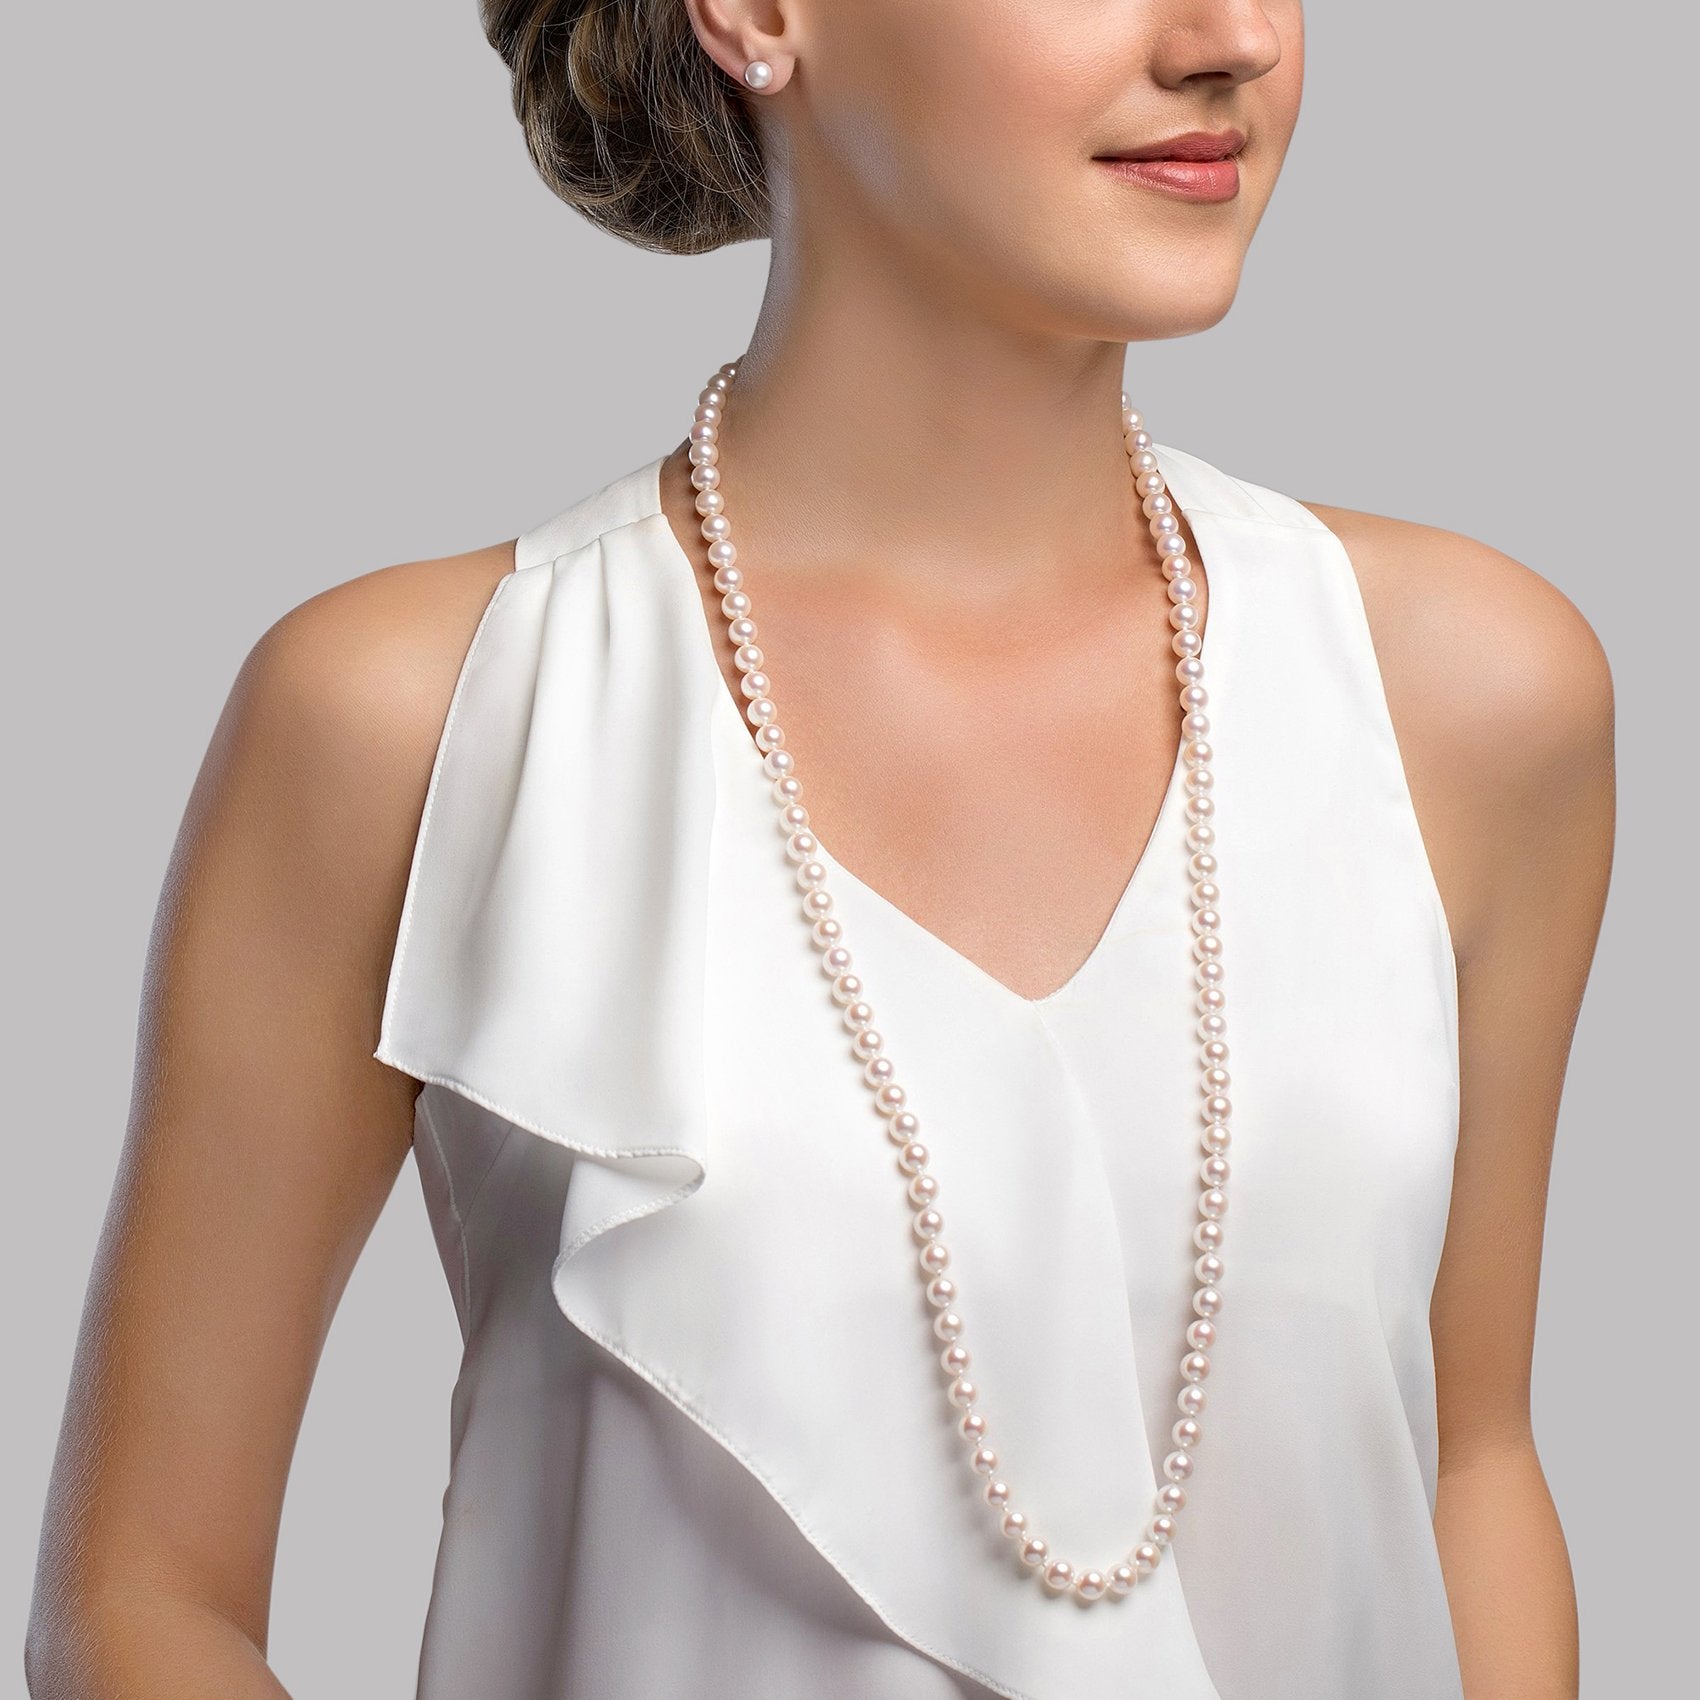 Avalon Pearls Pearl Necklace, White 9-10 mm Cultured Freshwater Pearls AAA  With 14k Solid Yellow